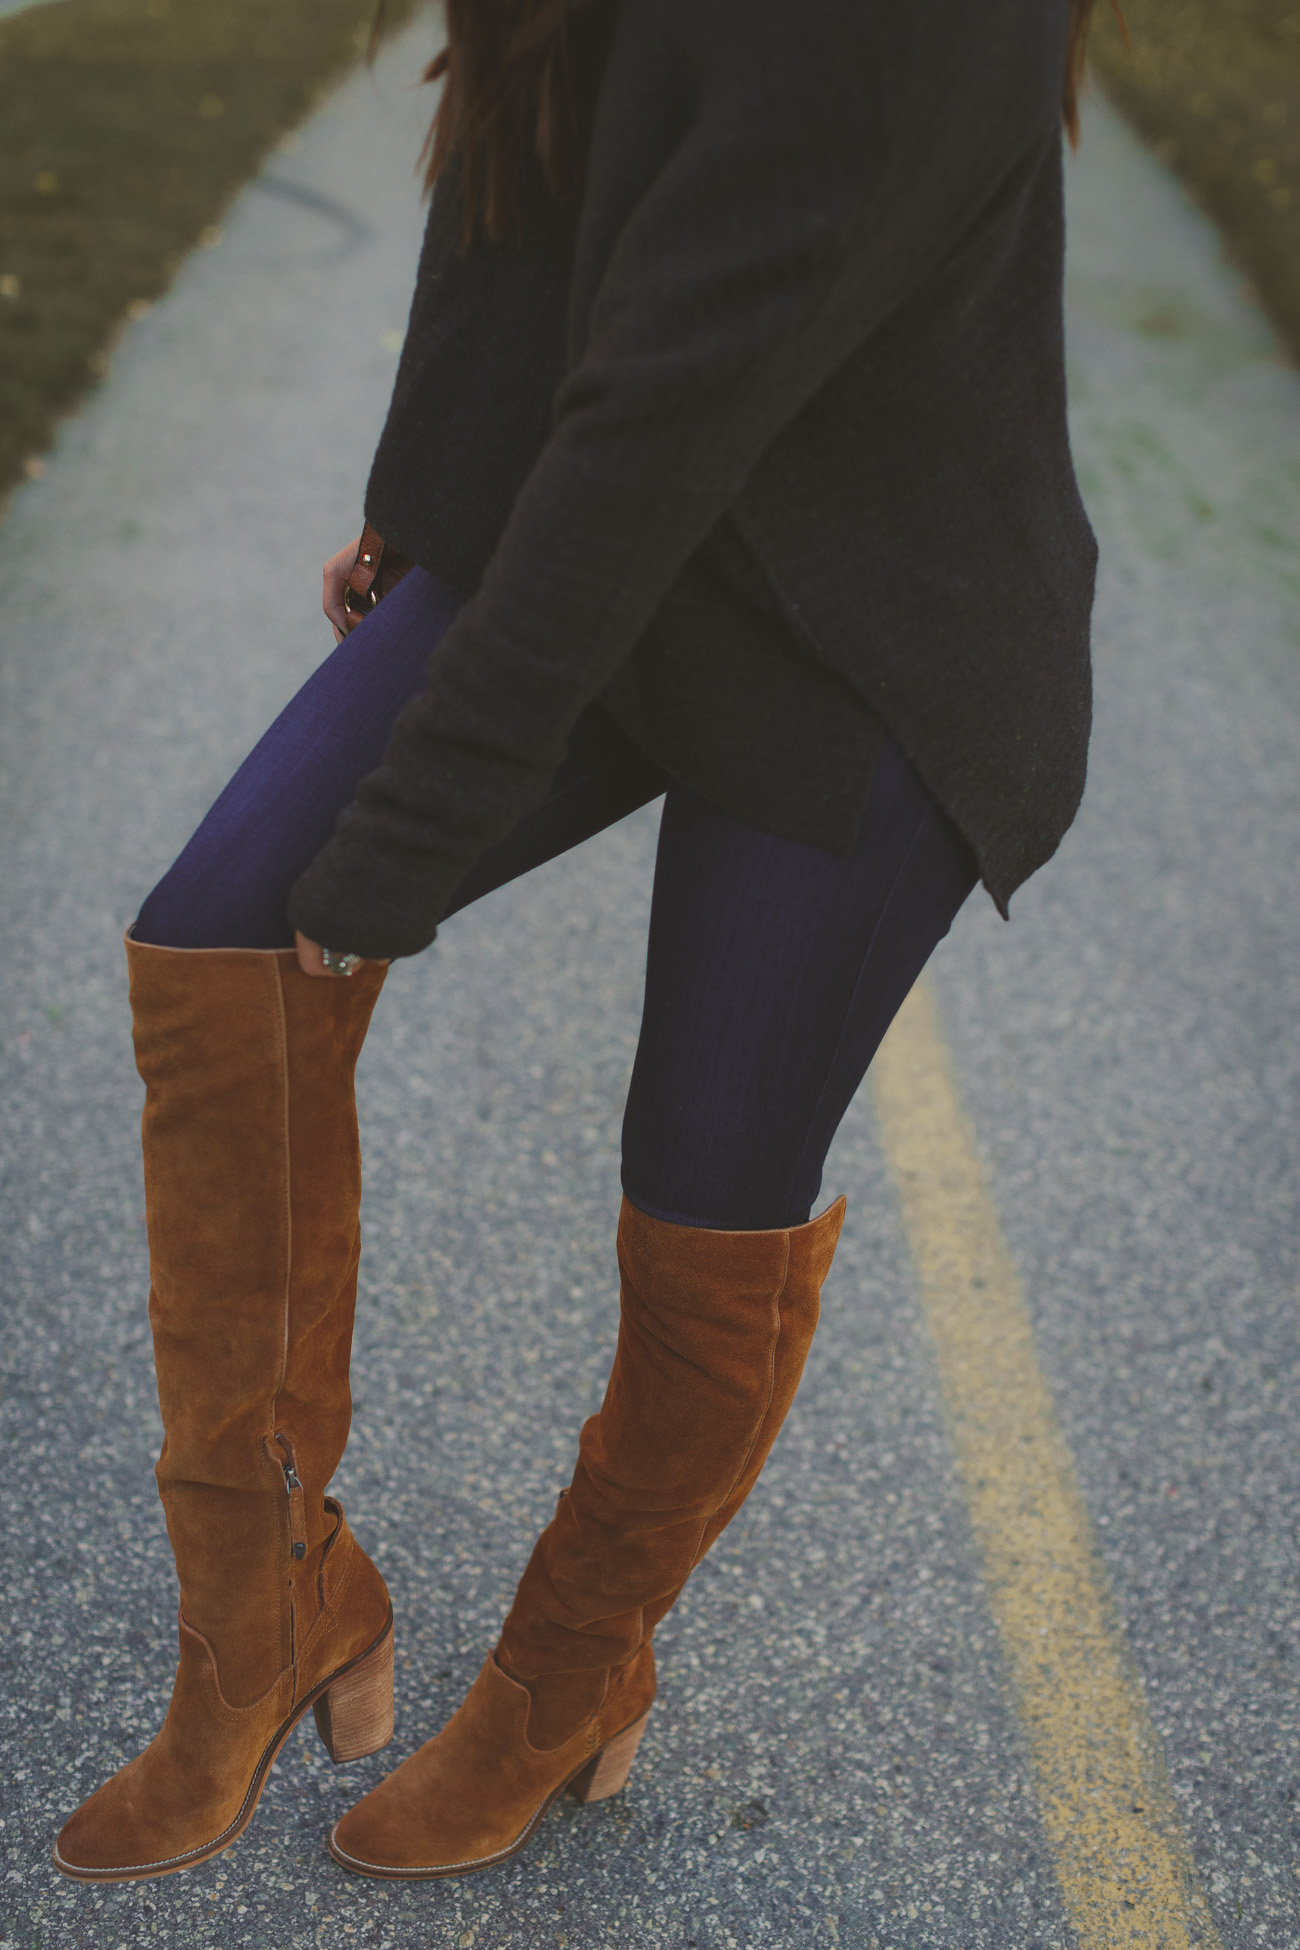 brown saddle bag, off the shoulder sweater, knit sweater, over the knee boots, dolce vita cash over the knee boot, vince camuto over the knee boot, vince camuto melaya over the knee boot, fall outfit, fall fashion, fall style // grace wainwright a southern drawl